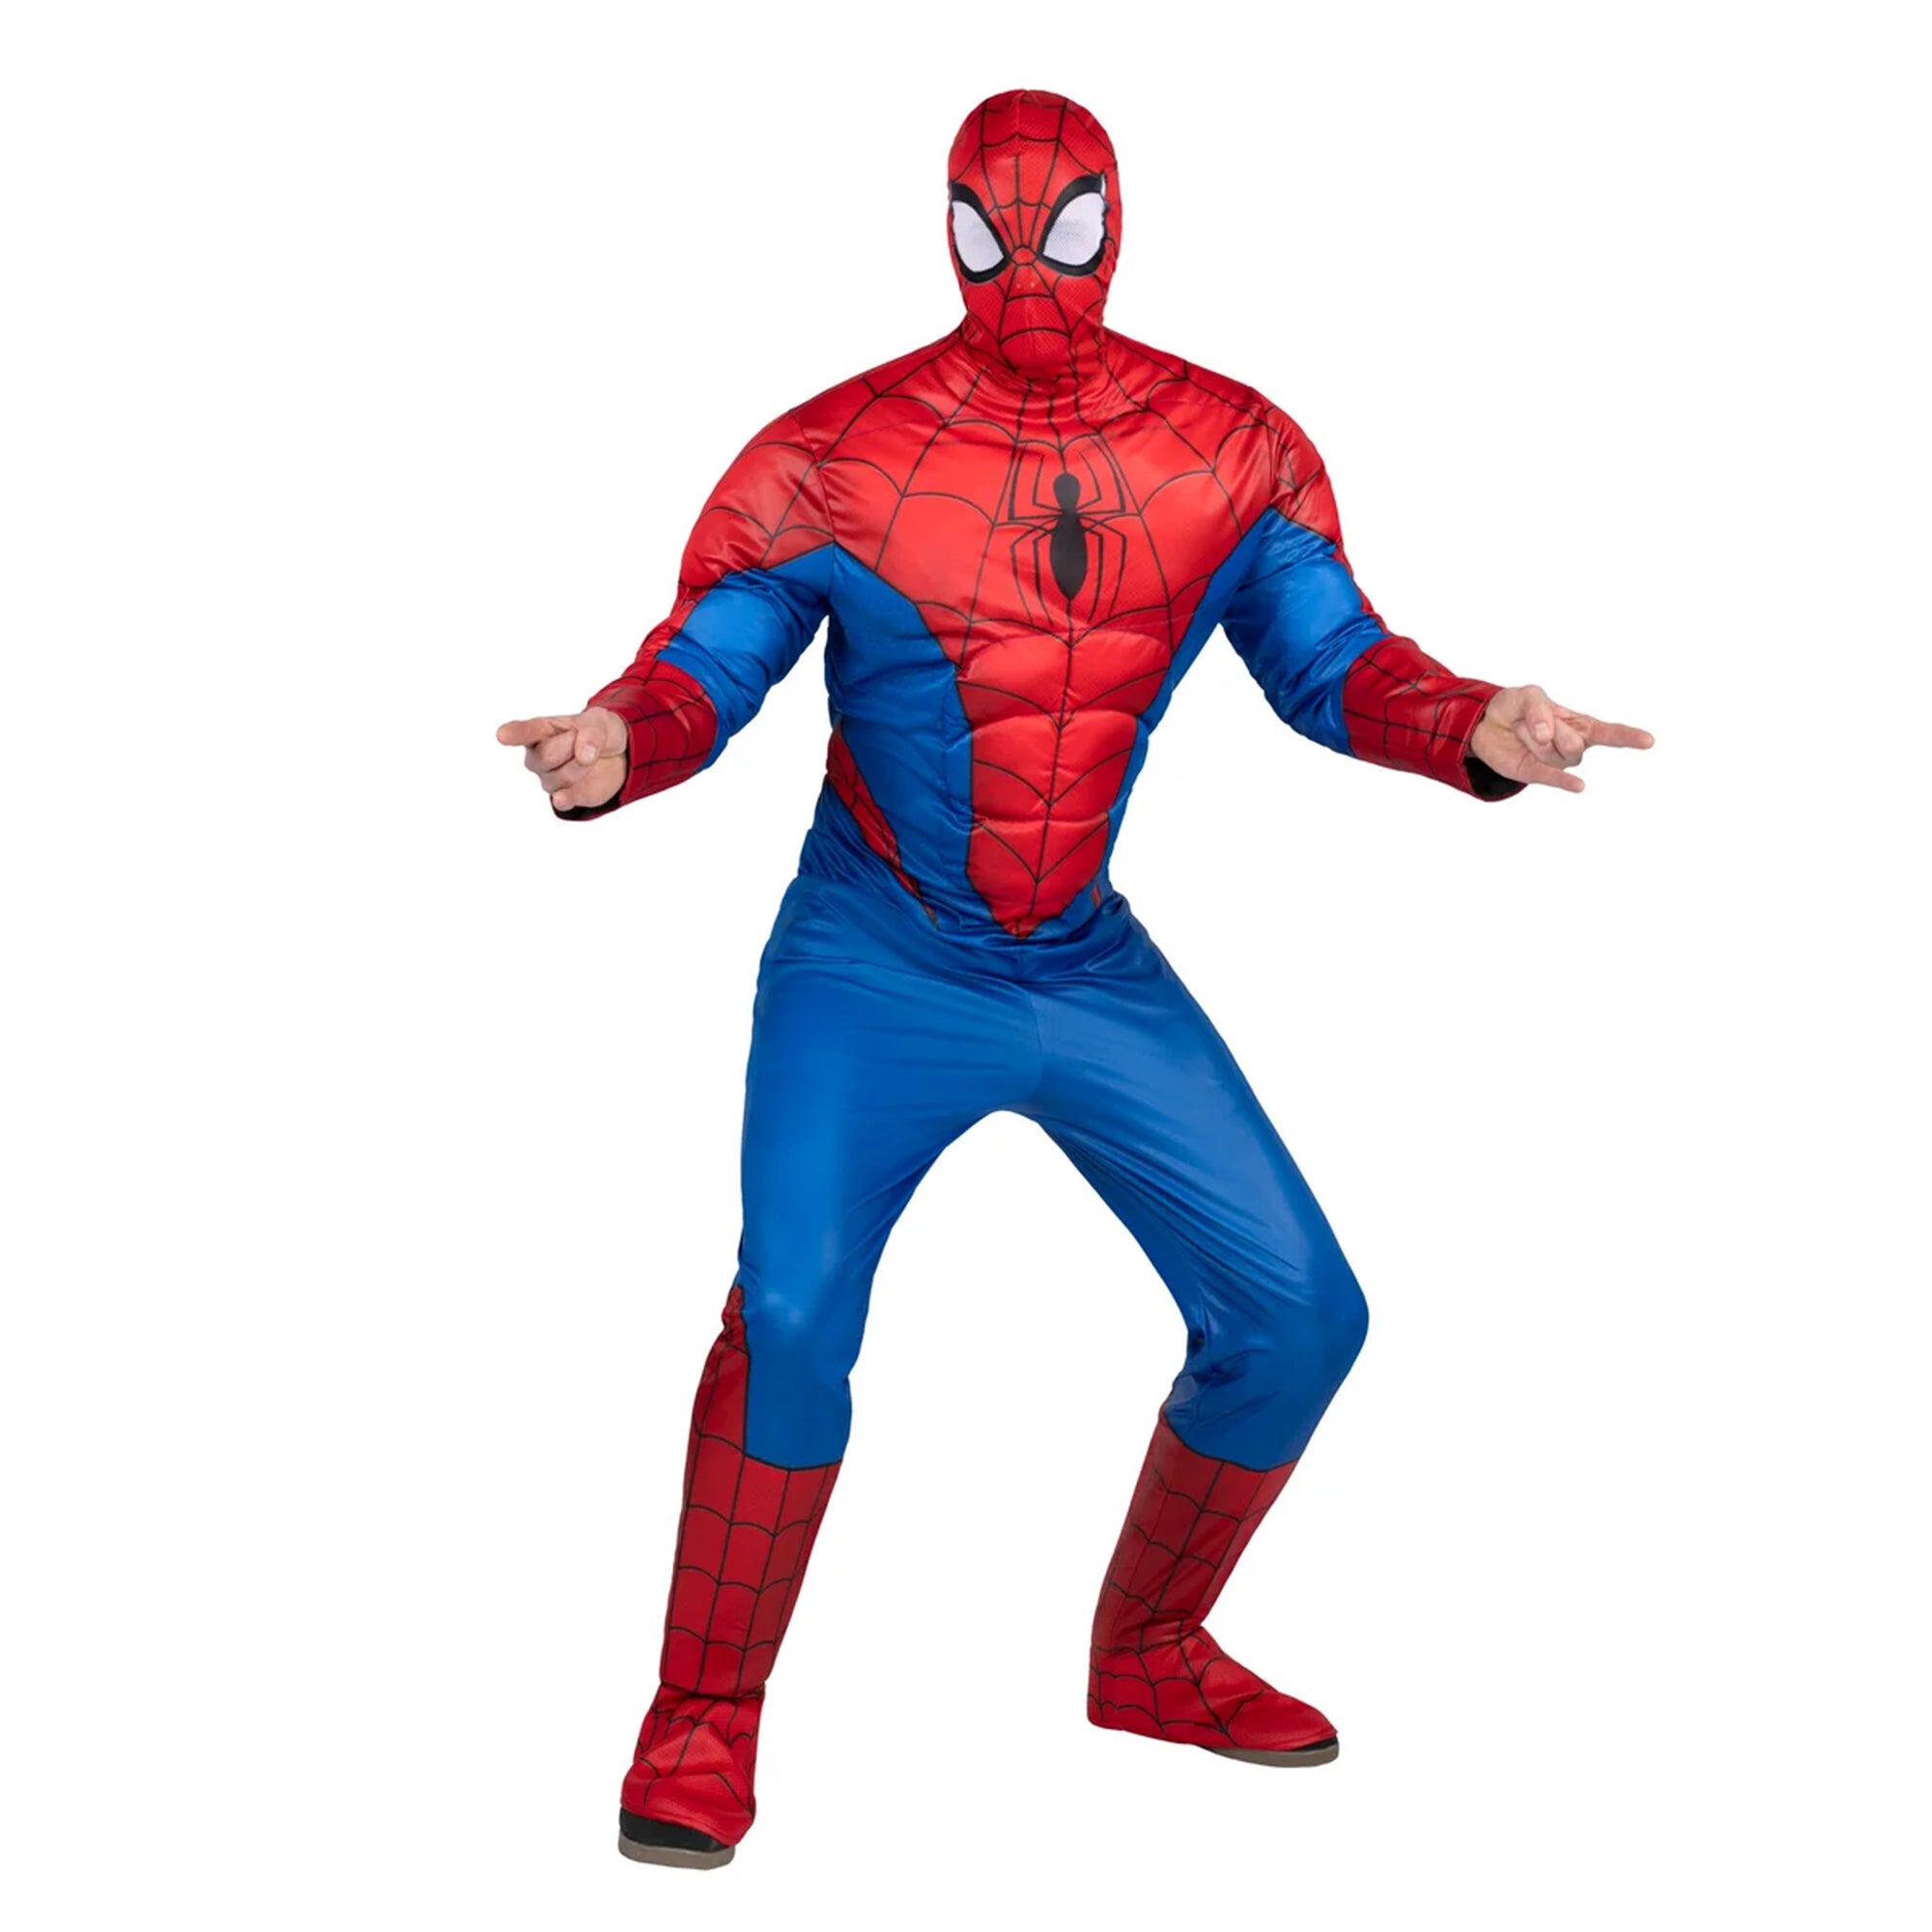 Marvel Spider-Man Costume for Adults, Padded Jumpsuit